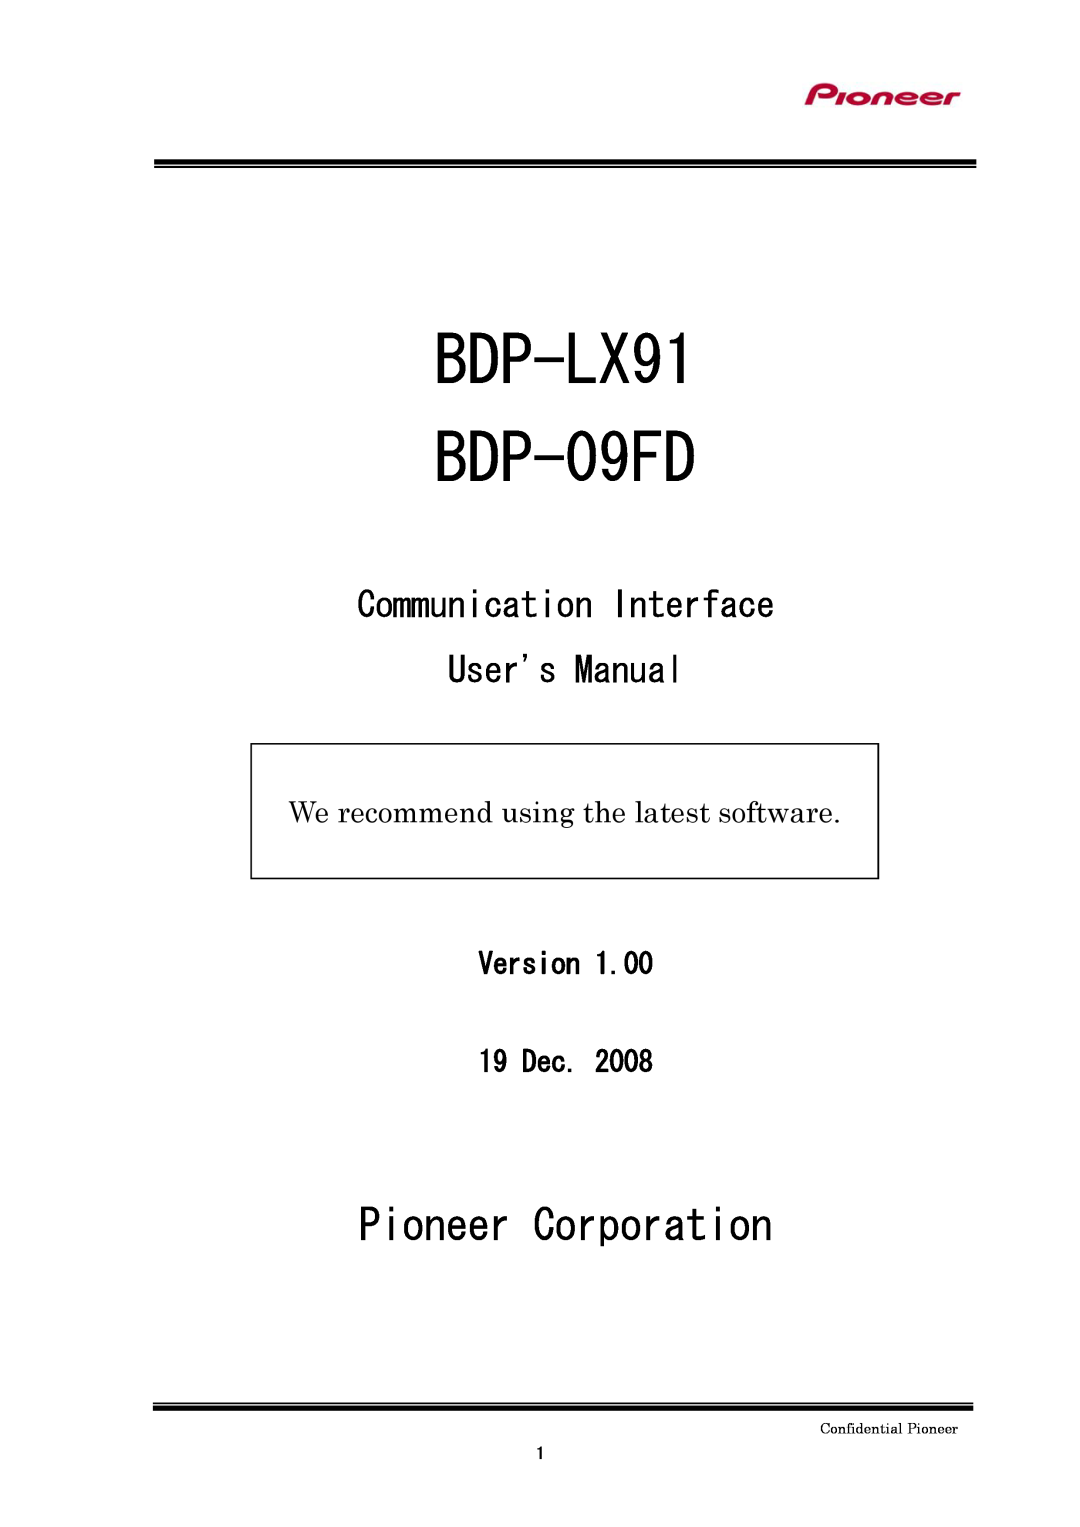 Pioneer user manual BDP-LX91 BDP-09FD, Pioneer Corporation, Communication Interface Users Manual, Version 19 Dec 